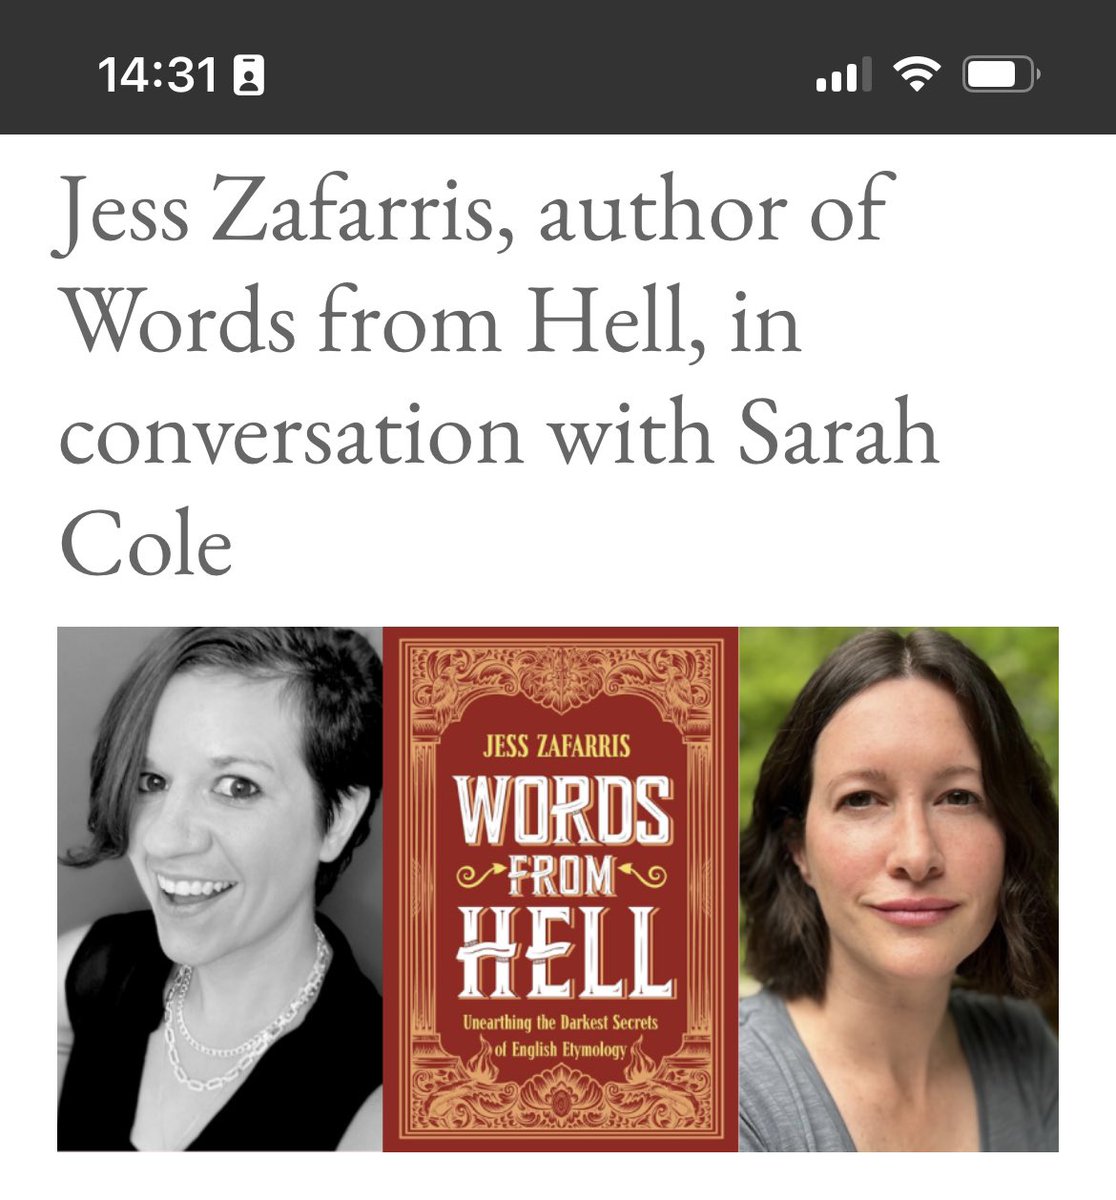 What makes bad words bad? What everyday words are rooted in naughtiness? Find out on APRIL 23rd when I interview the inimitable @jesszafarris at @porter_square_books in Boston. Be there or be an an a*sehole, wanker, sh*thead, [fill in the blank]! #swearwordsarefun #bookevent